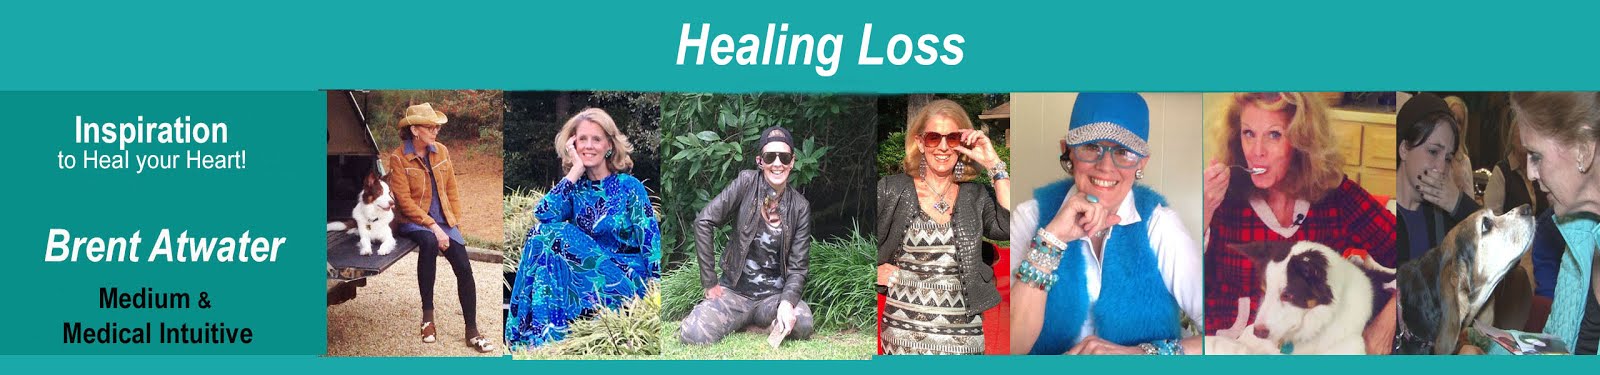 Healing Loss with Brent Atwater